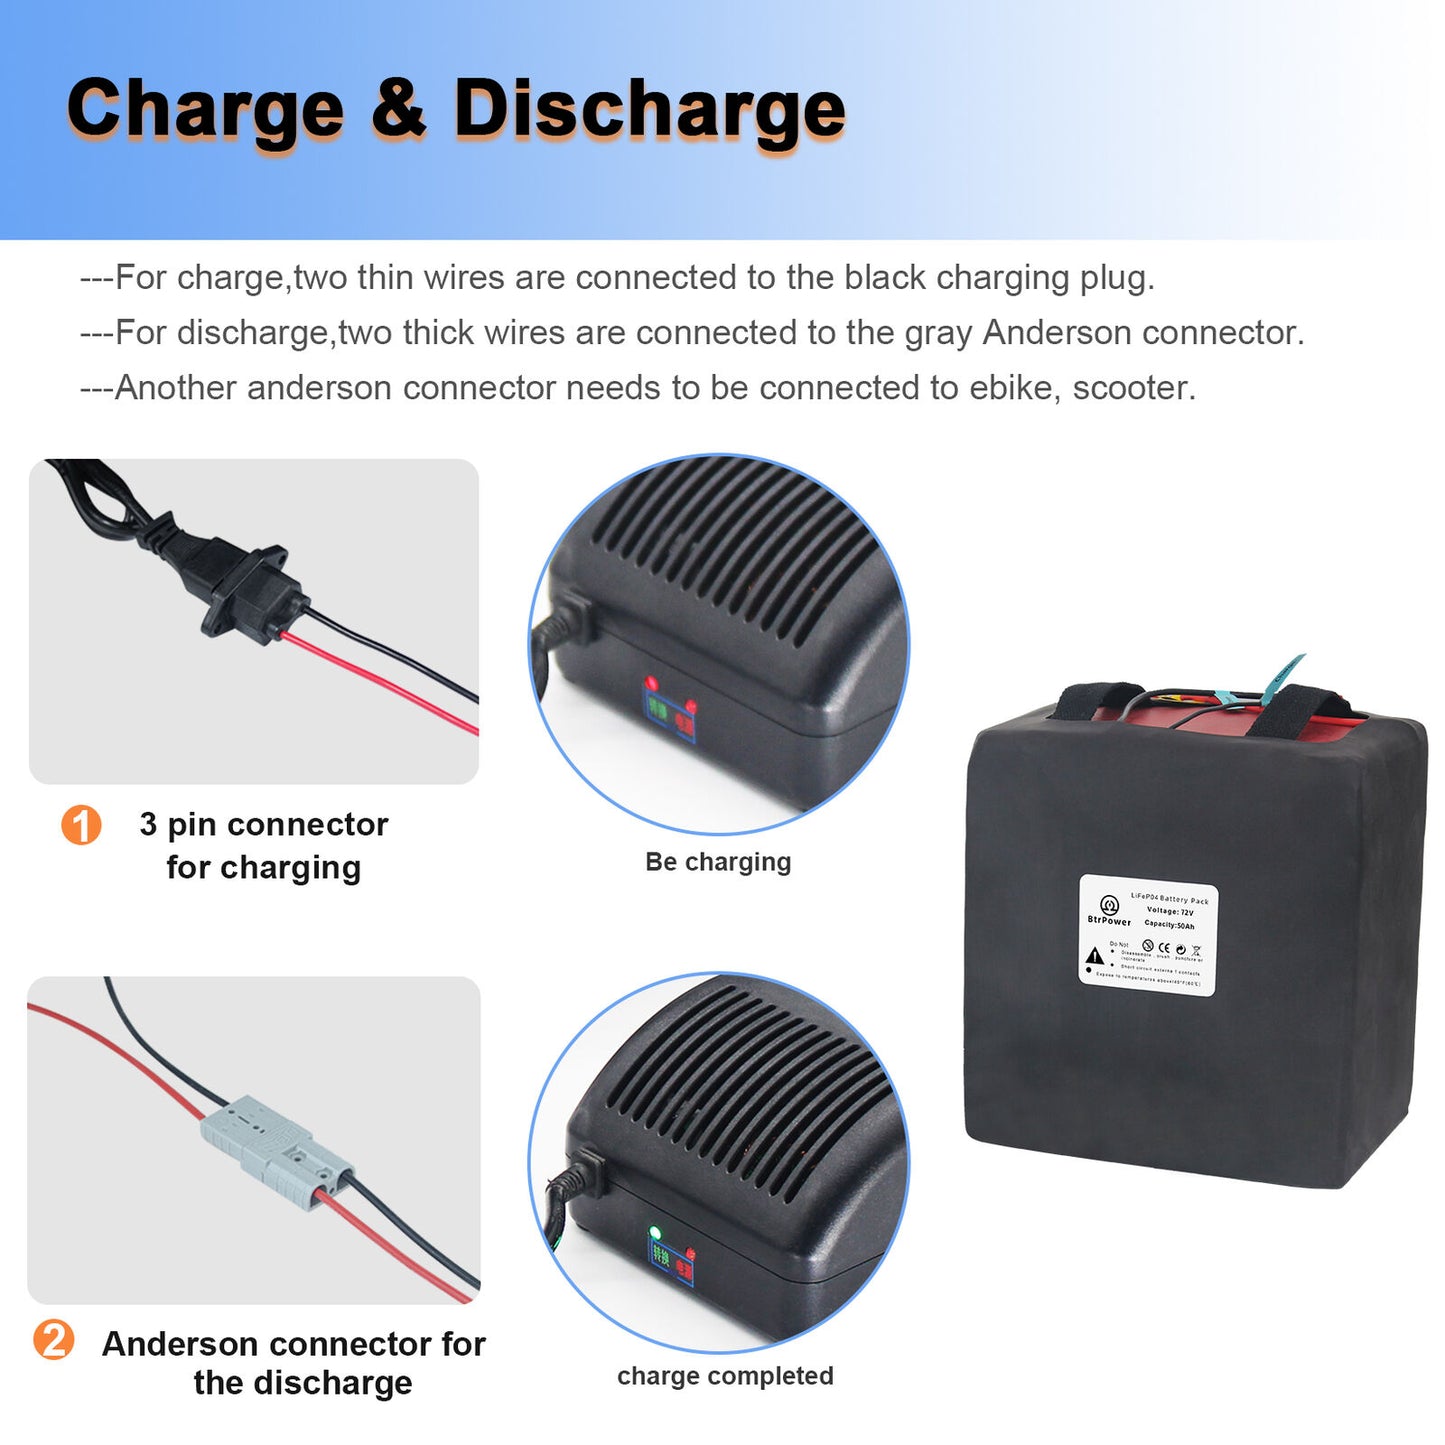 BtrPower Ebike Battery 72V 50AH Lifepo4 Battery Pack with 5A Charger 50A BMS